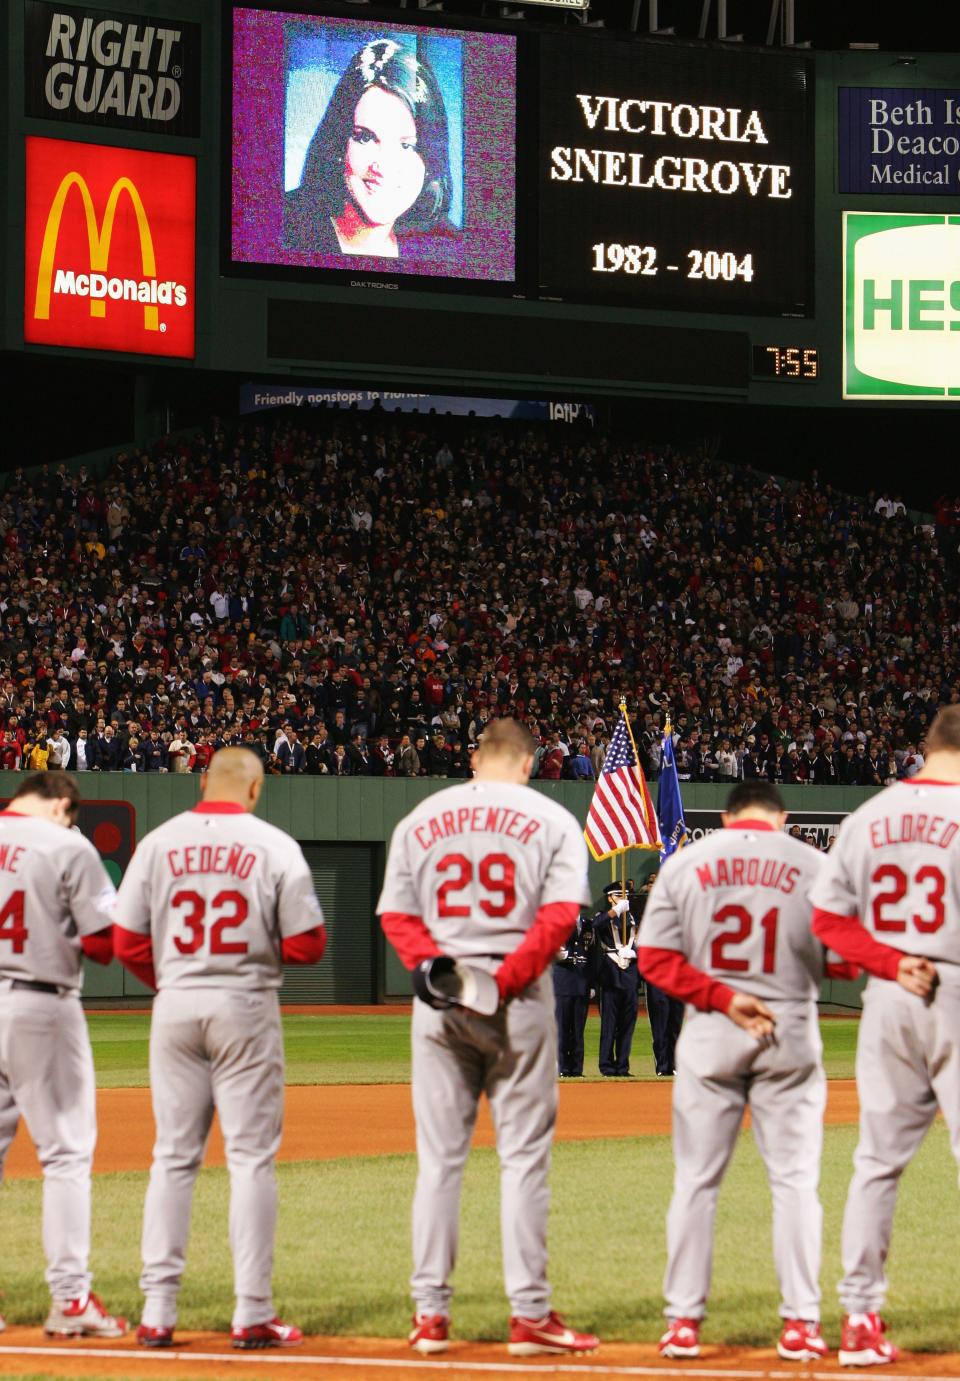 BOSTON - OCTOBER 23:  The stadium takes a moment of silence during game one of the World Series in memory of Victoria Snelgrove who was killed following game seven of the ALCS  between the Boston Red Sox and the St. Louis Cardinals.